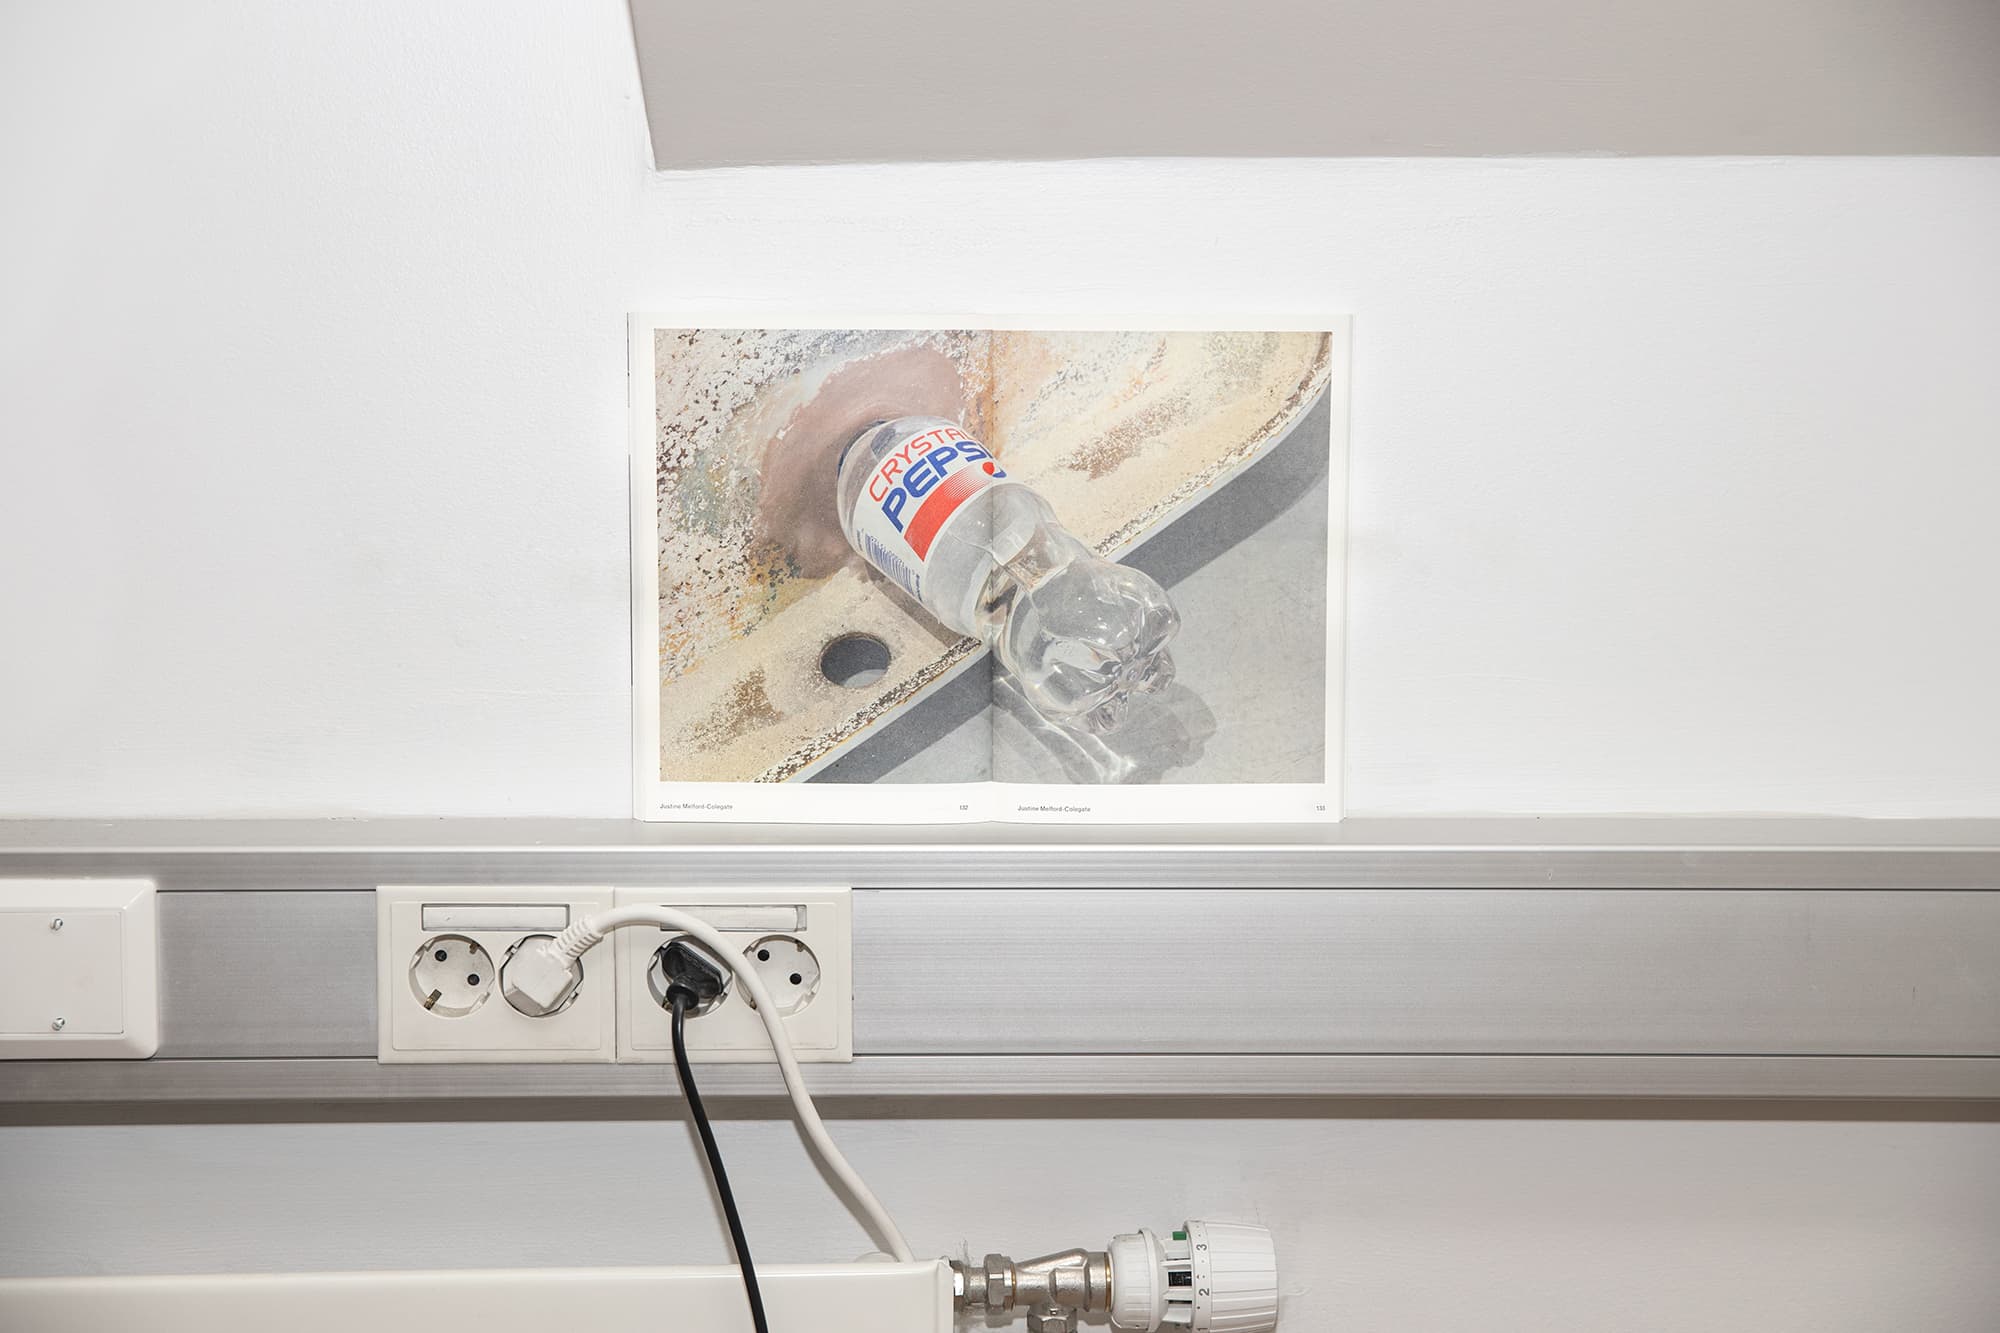 A folded out book sits on a chrome sill in an office. The book spread shows a detail of an artwork. A crystal pepsi bottle is attached to a bathtub.